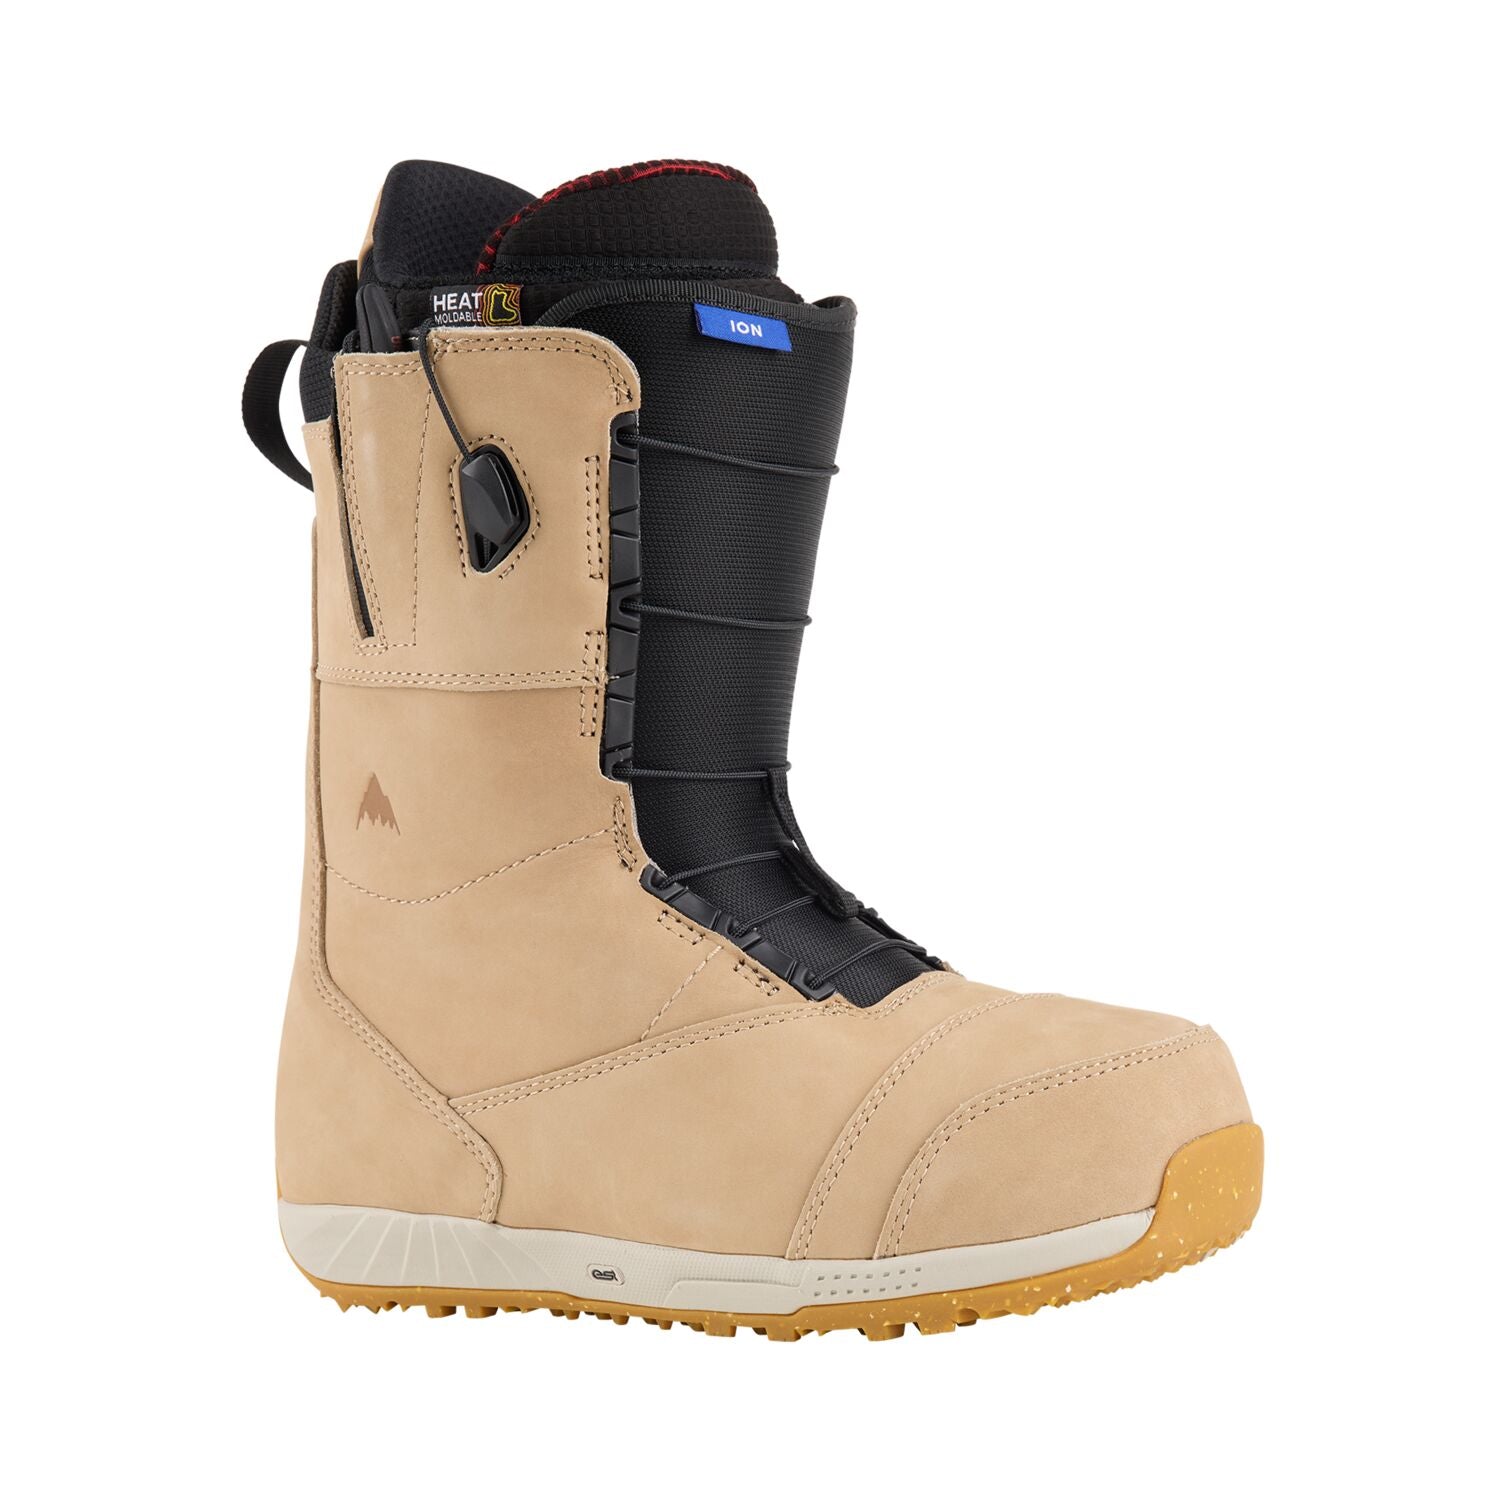 Men's Ion Leather Snowboard Boots